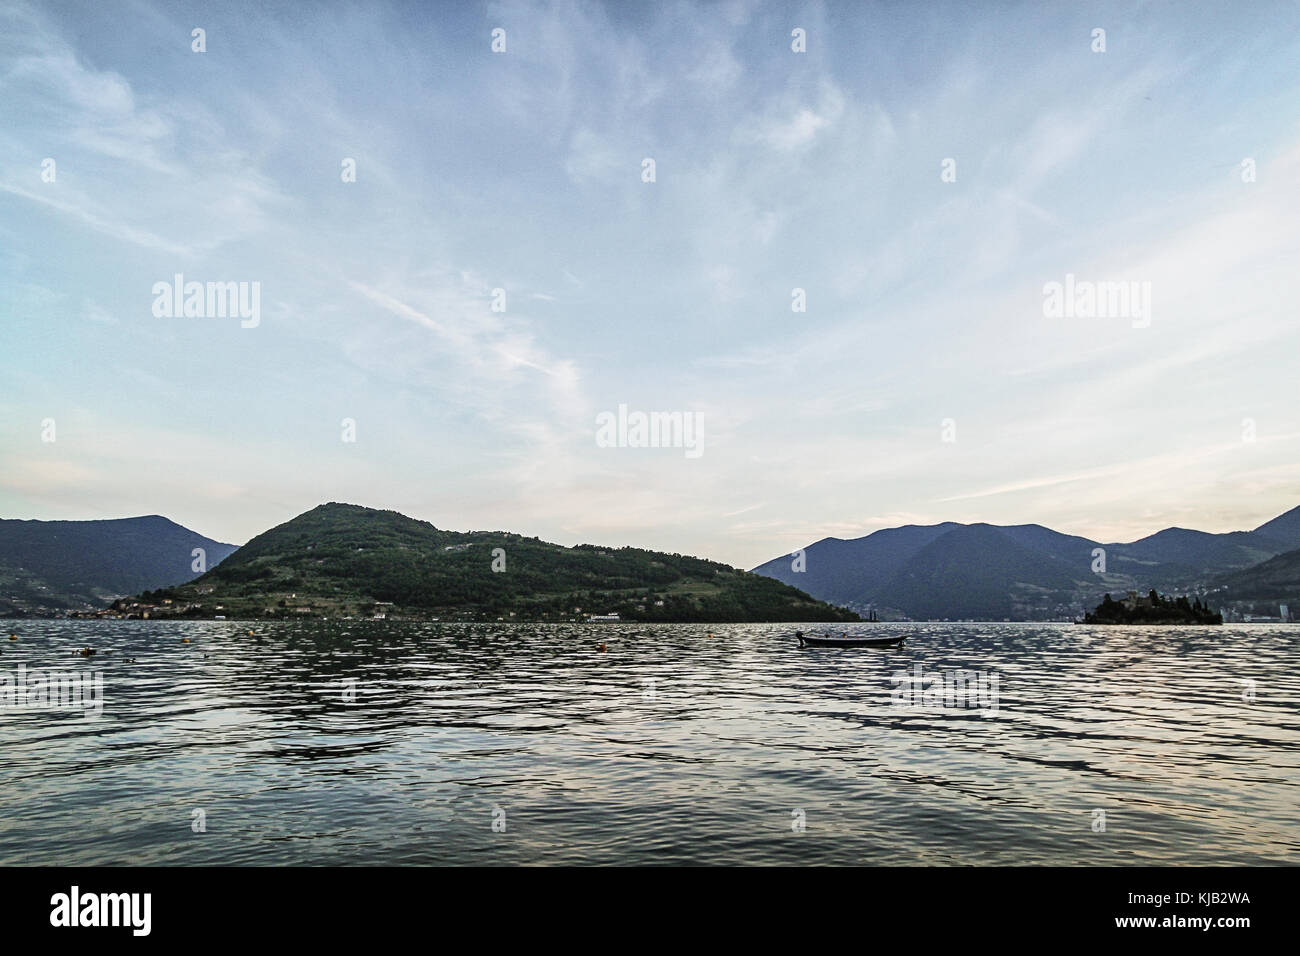 The Iseo lake in Italy Stock Photo